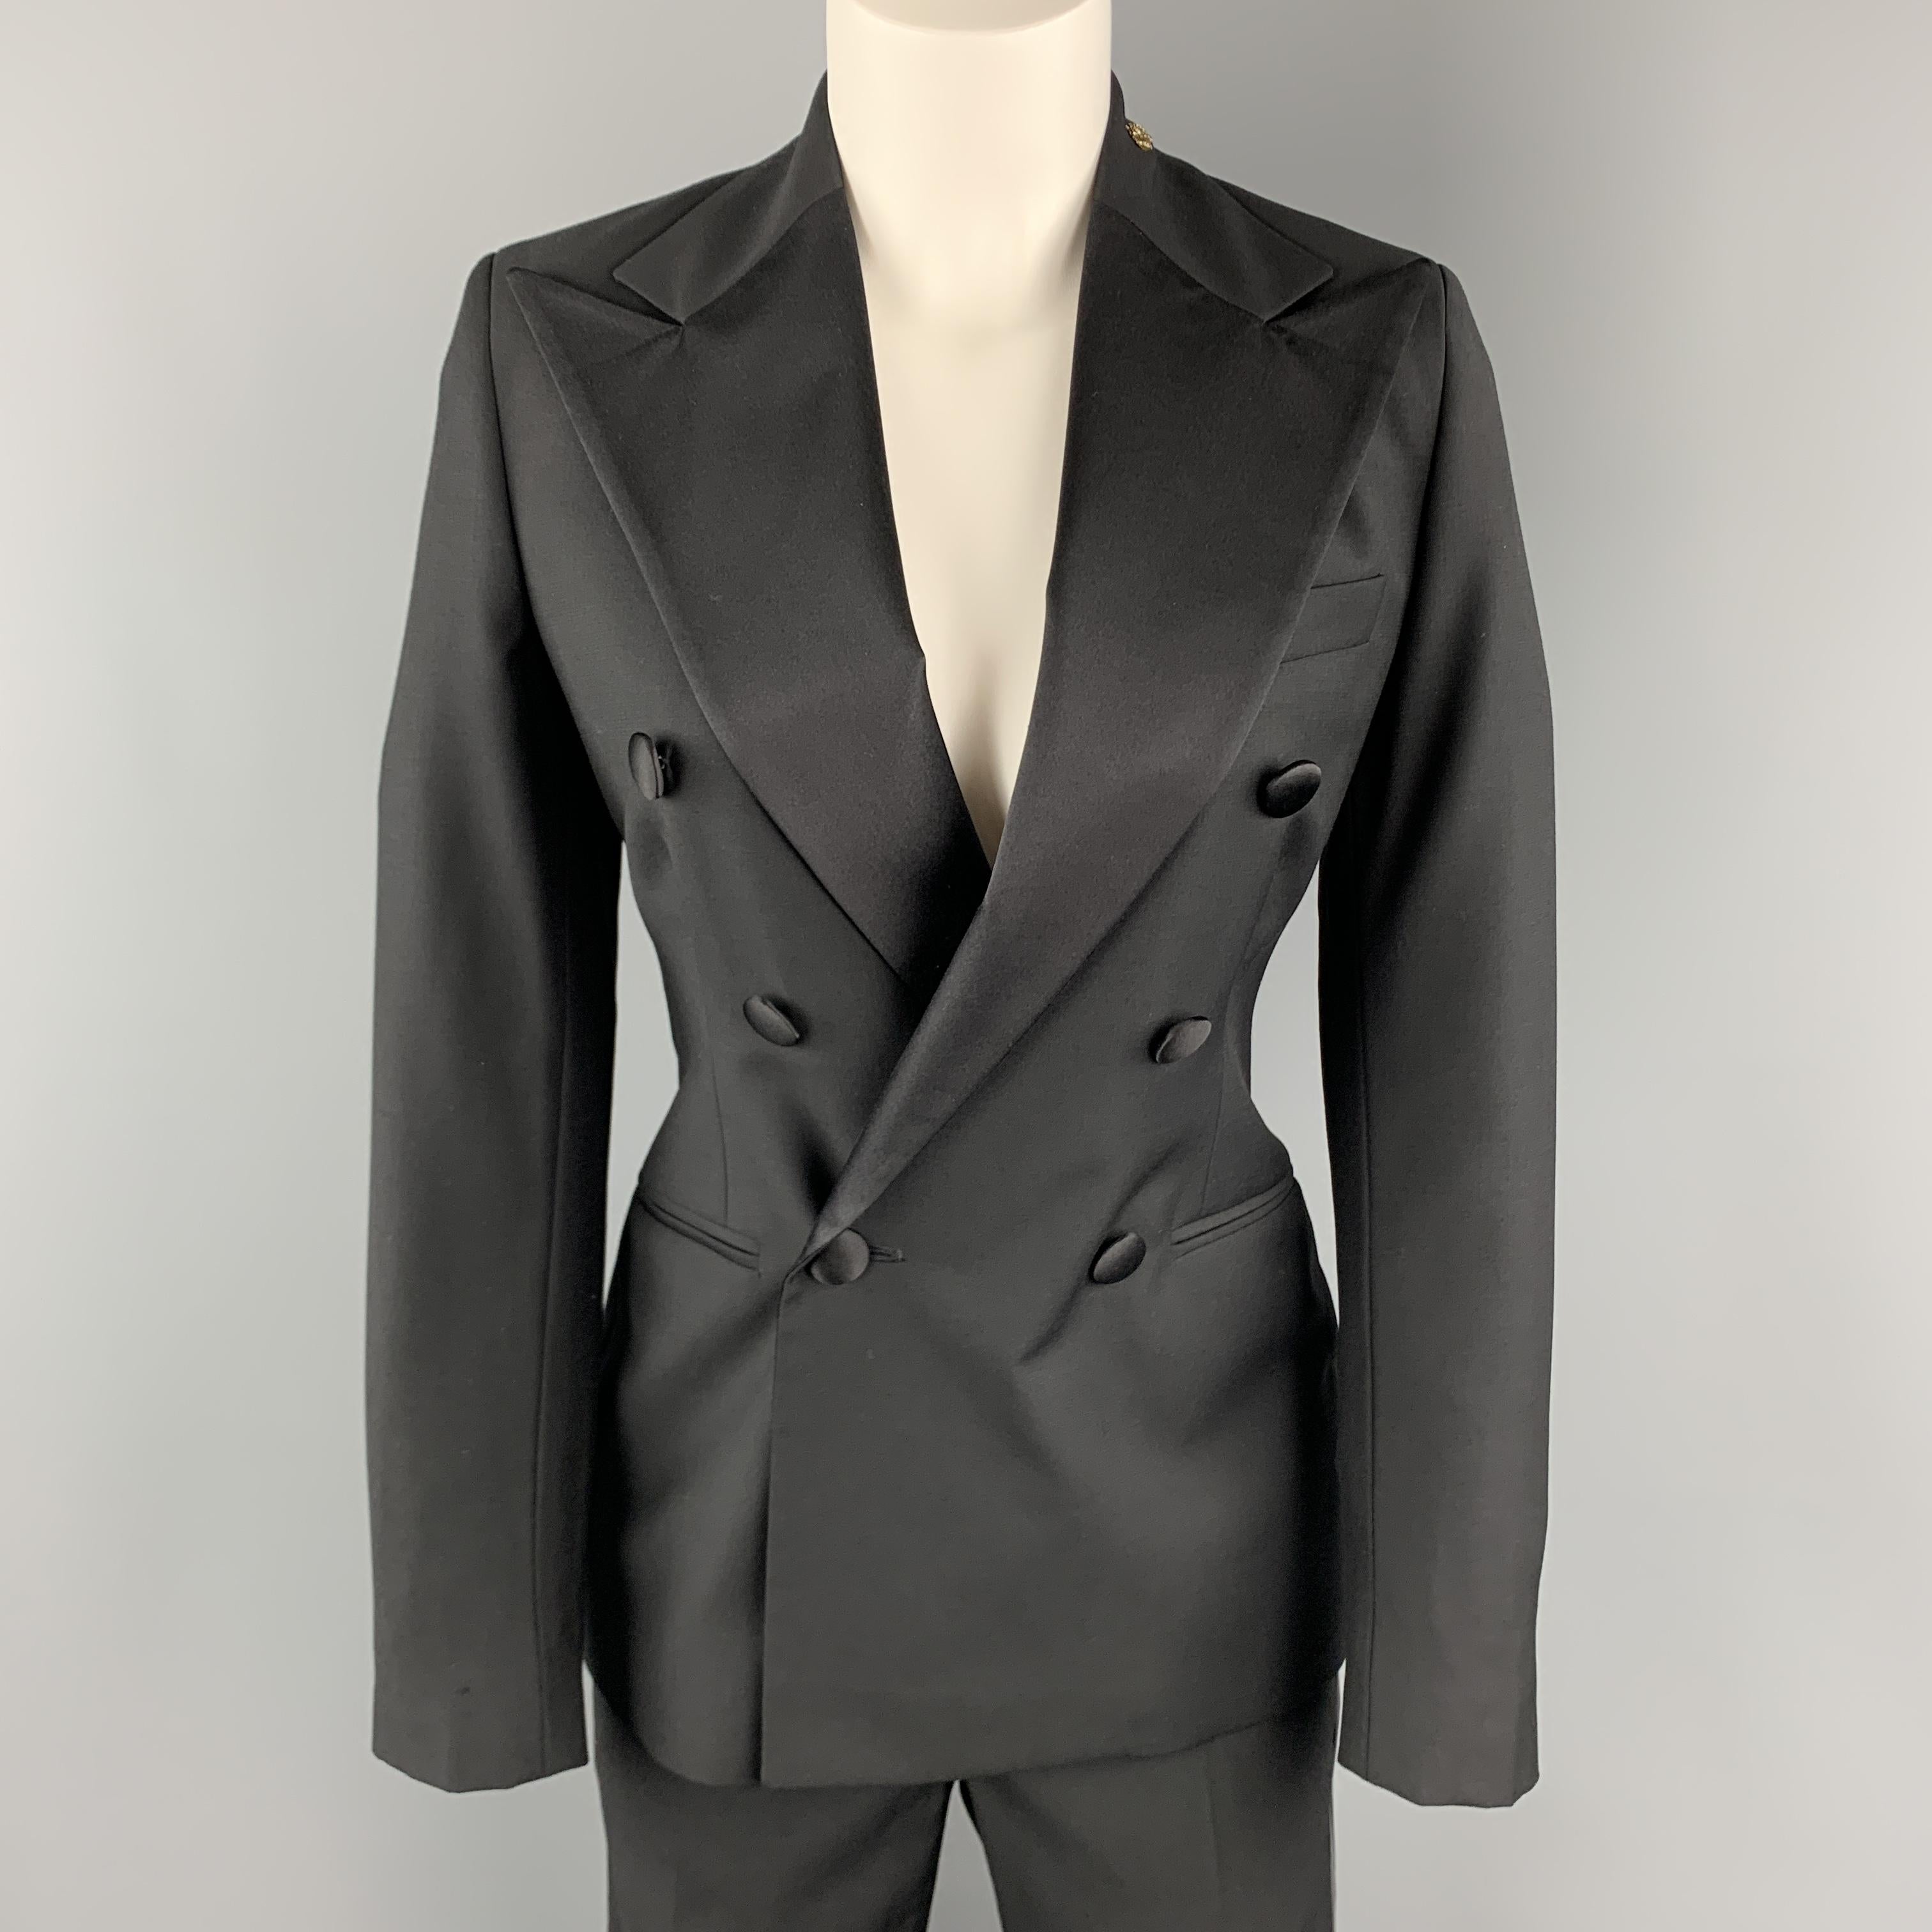 RALPH LAUREN BLUE LABEL tuxedo suit comes in black wool gabardine and includes a double breasted sport coat with satin peak lapel detailed with a skull brooch and matching flat front satin stripe trousers. Made in The USA.

Excellent Pre-Owned